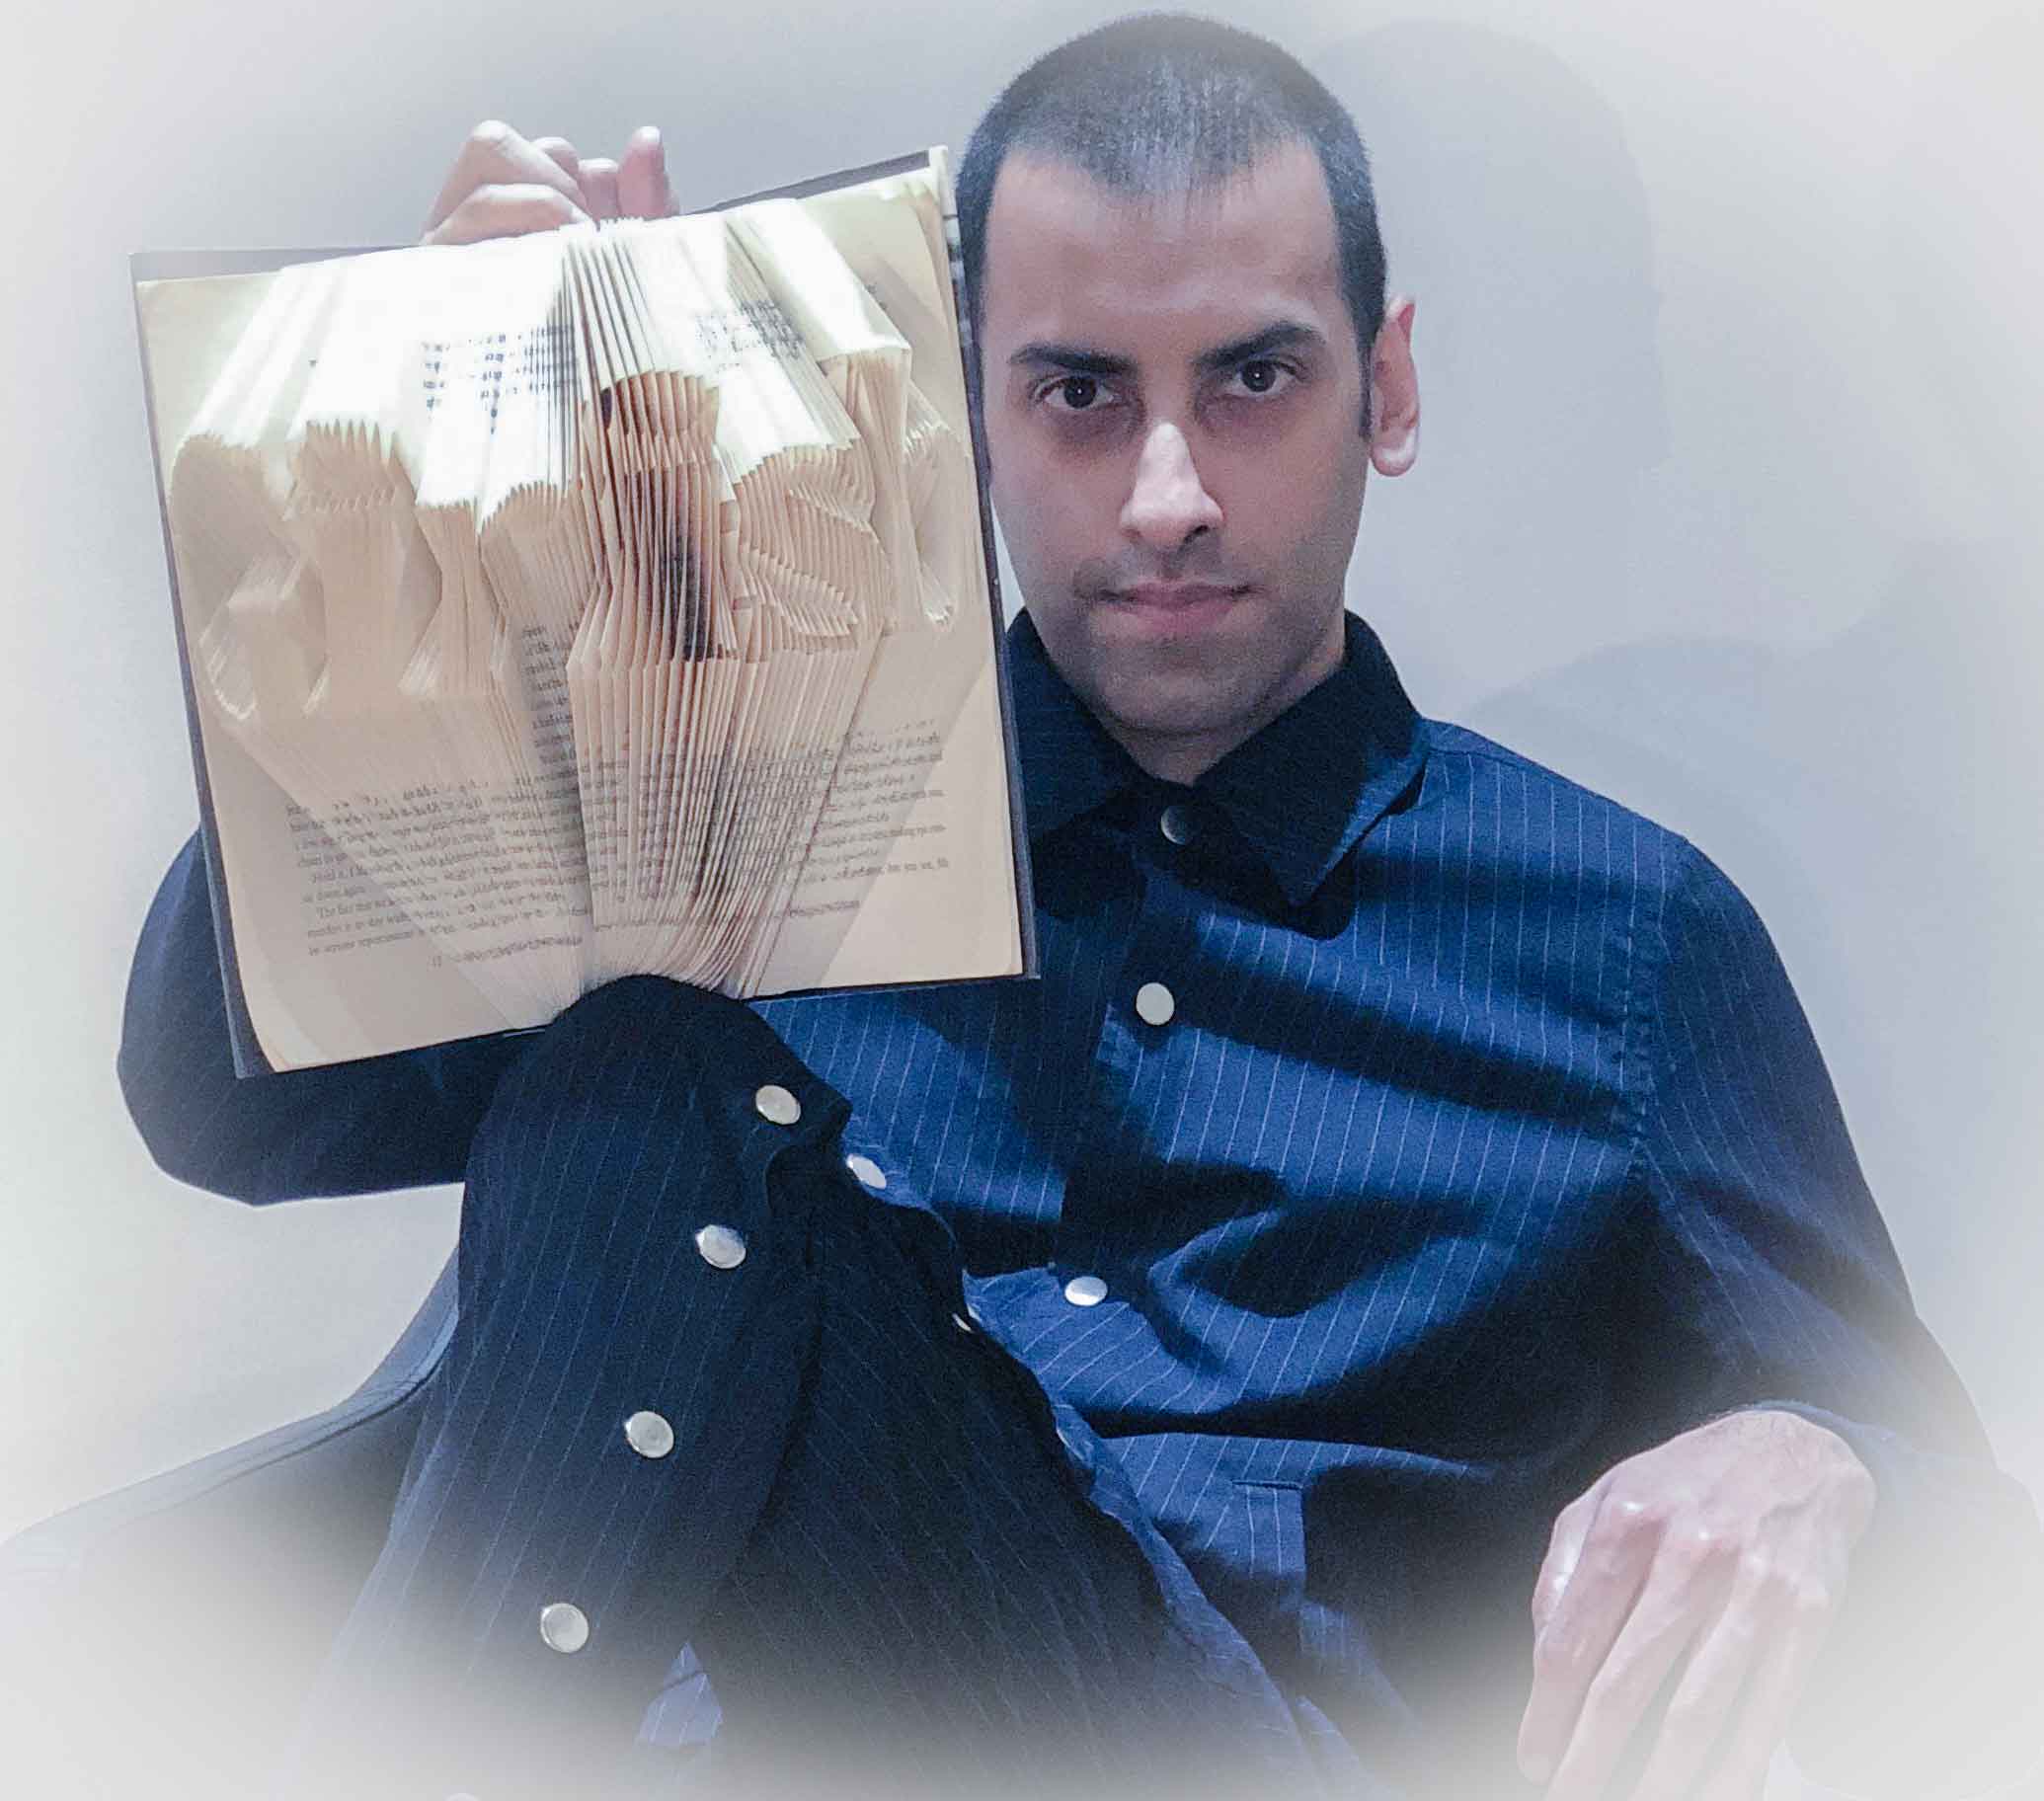 Dressed elegantly in pin stripes whilst holding a bespoke and personalised book, which is made to spell 'Girish' from its pages. It is like a piece of art